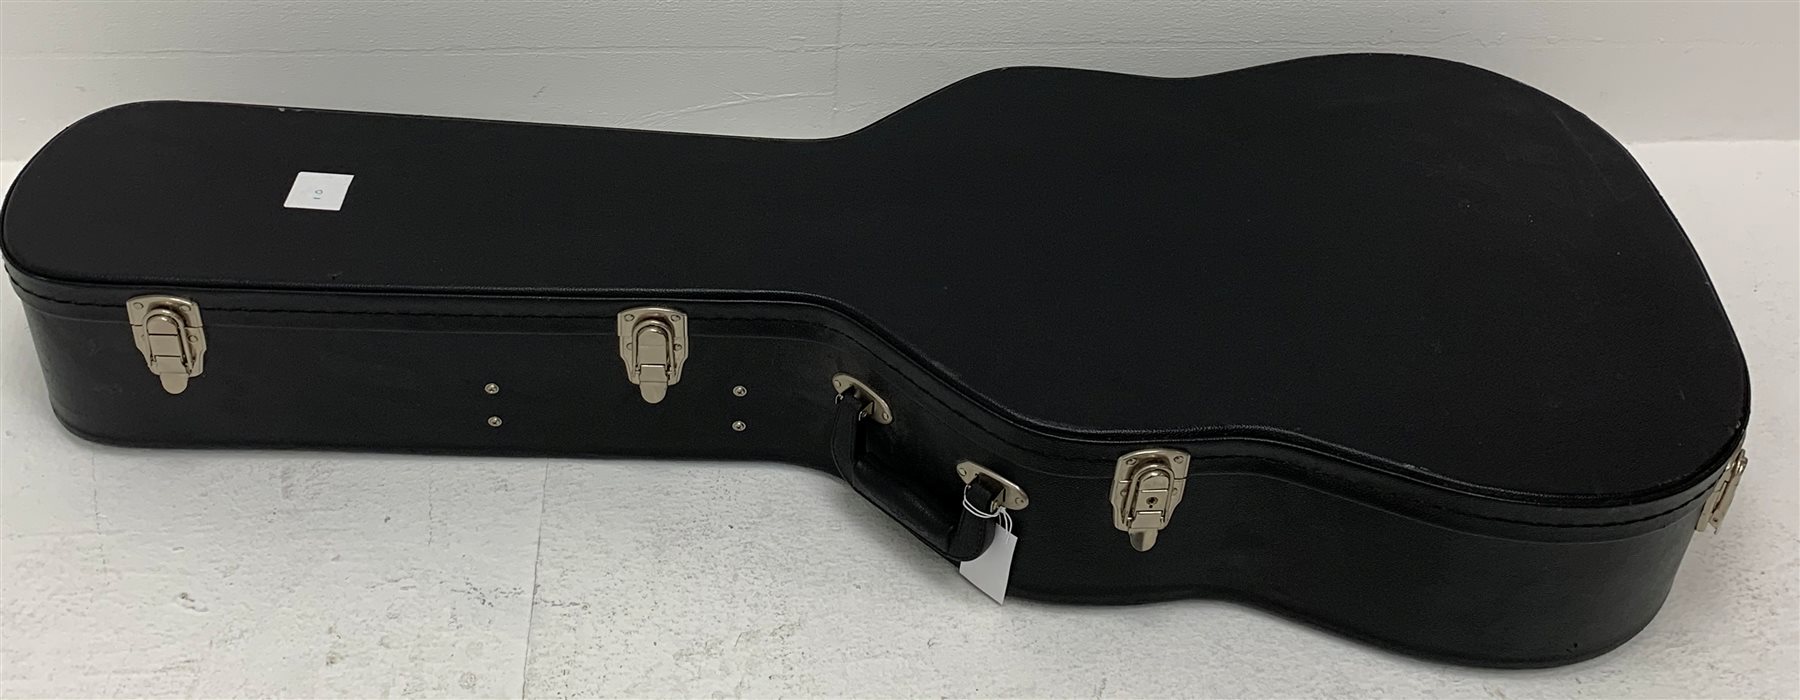 BC Rich electro acoustic guitar serial no. 001 in carrying case - Image 9 of 9